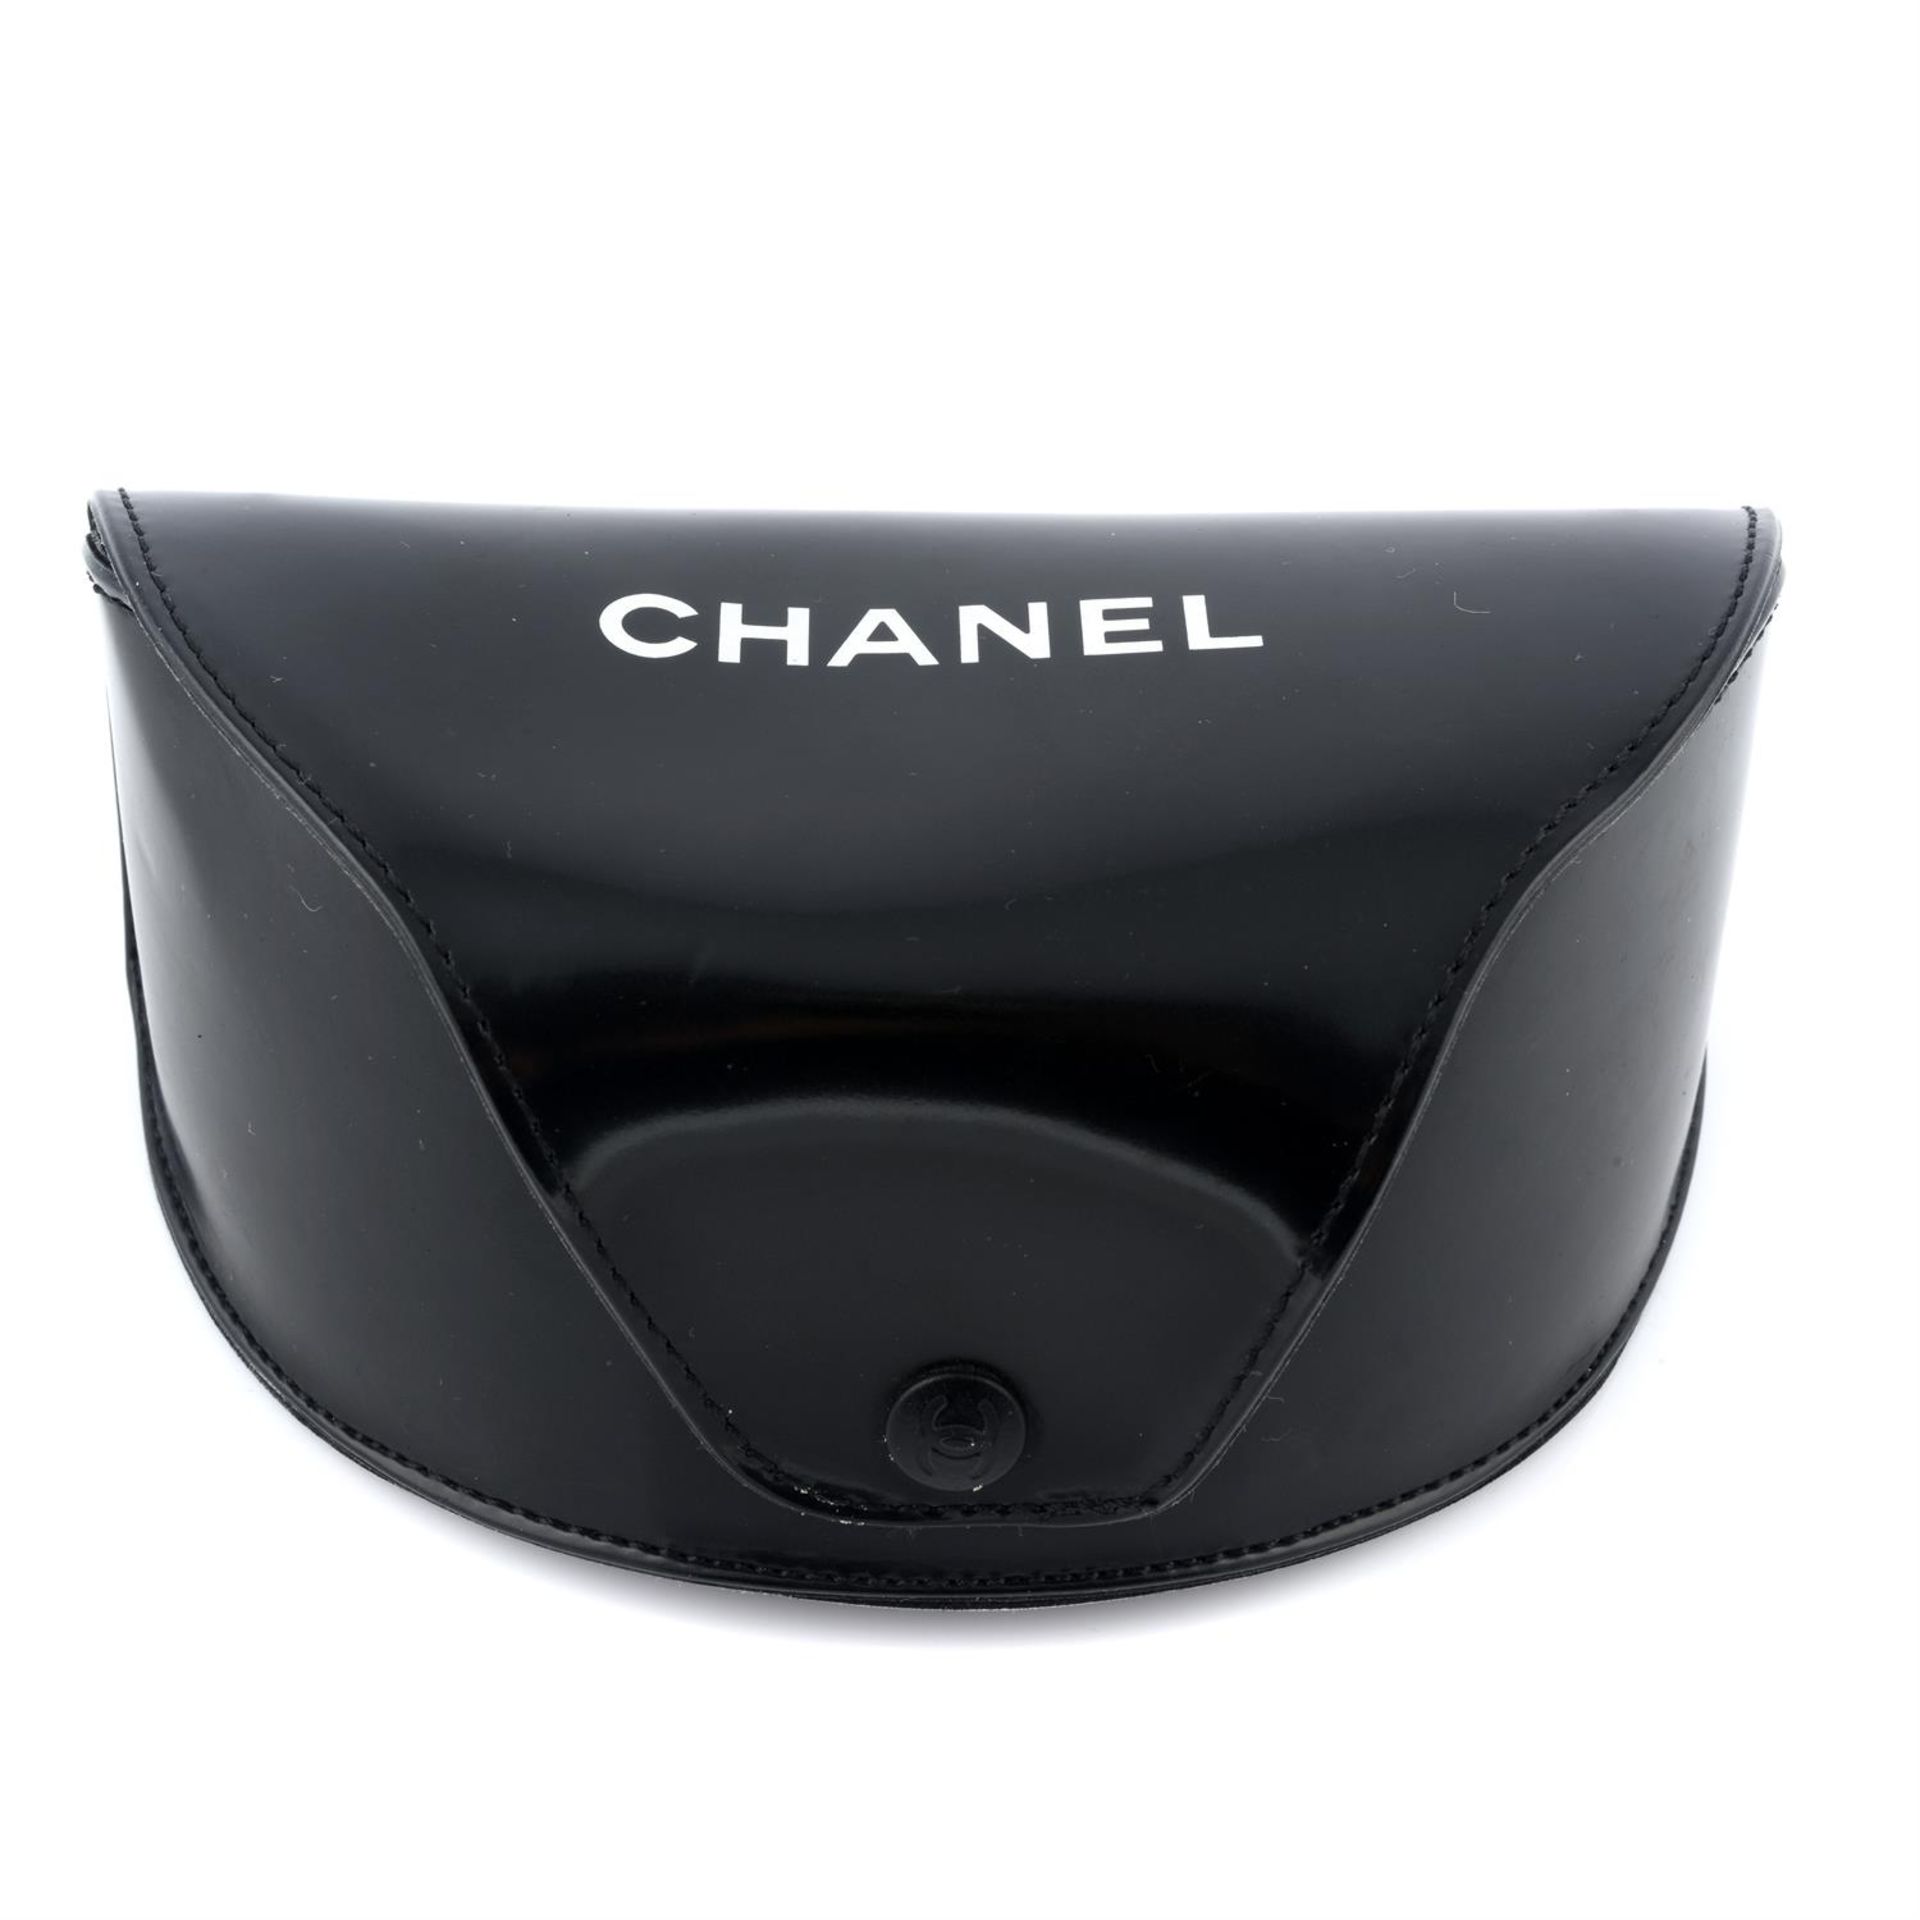 CHANEL- a pair of sunglasses. - Image 3 of 3